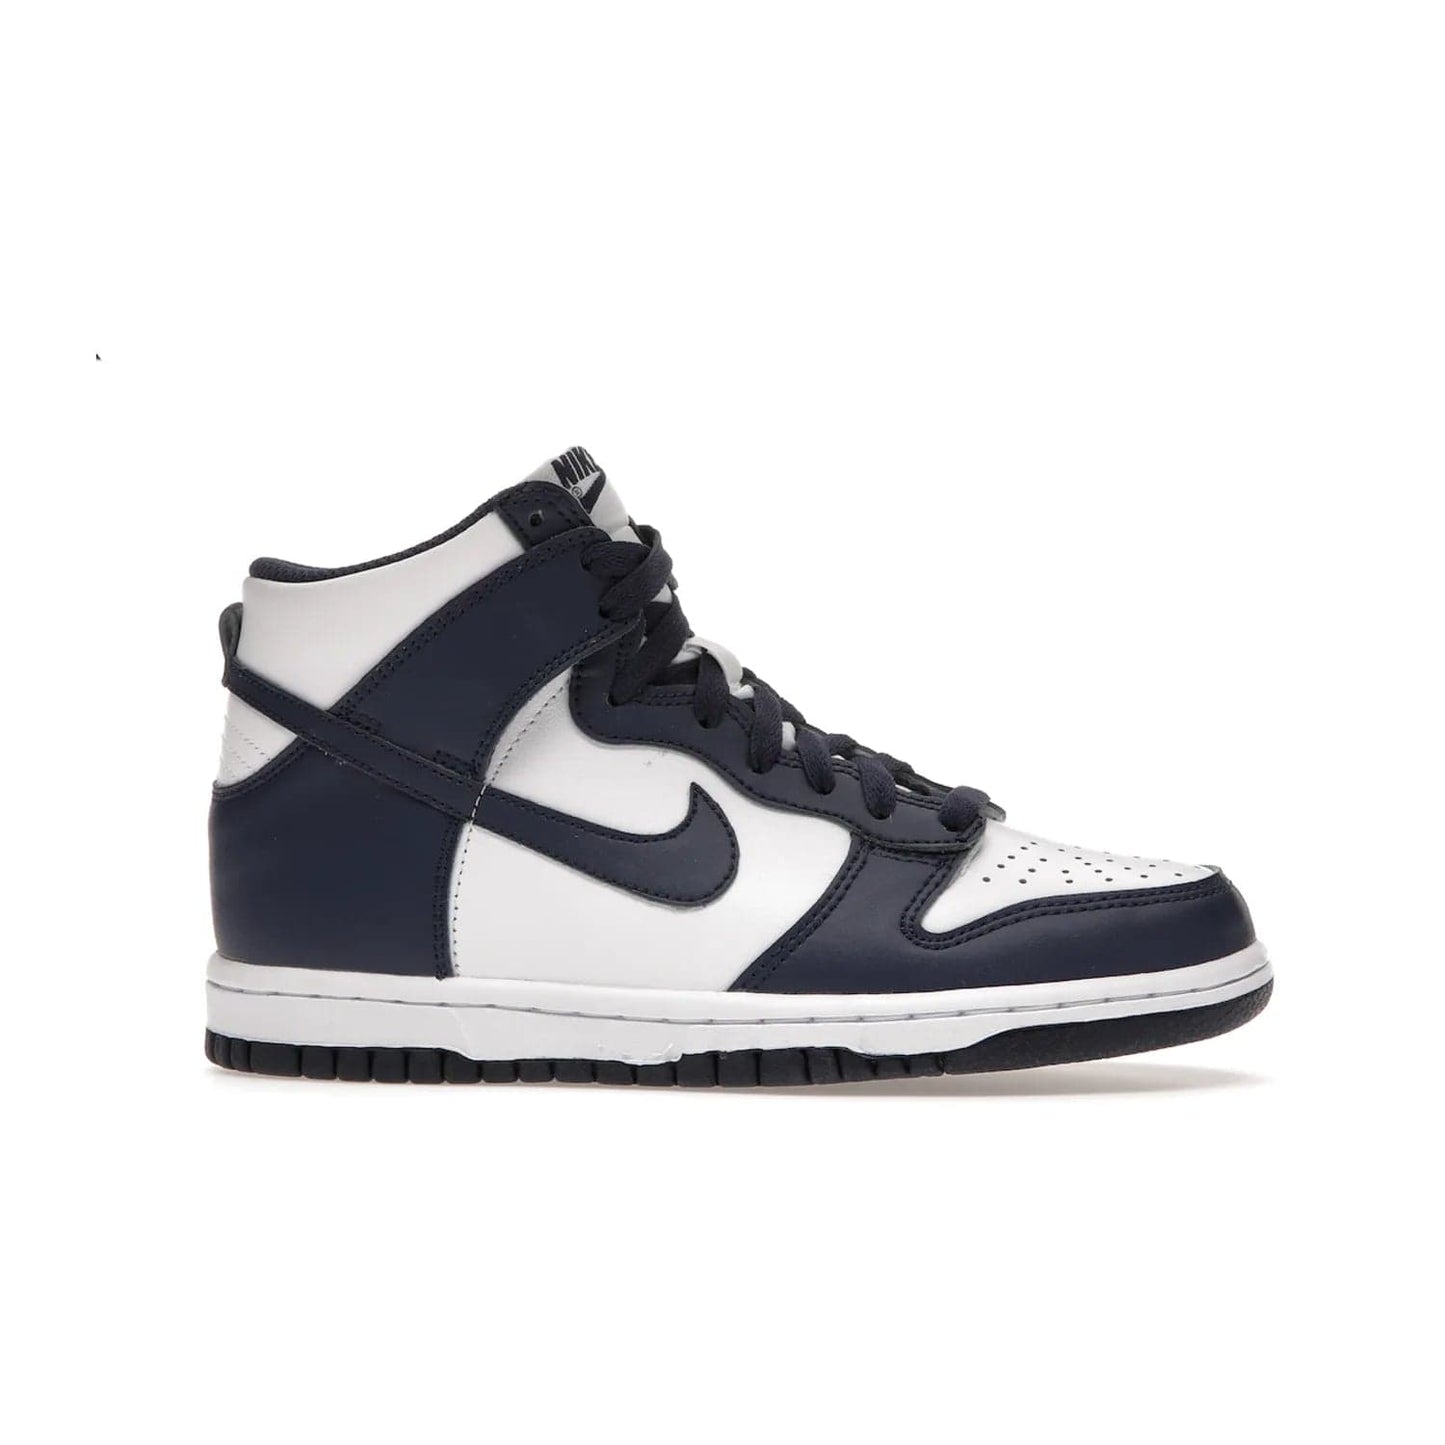 Nike Dunk High Championship Navy (GS) - Image 2 - Only at www.BallersClubKickz.com - Nike Dunk High Championship Navy GS: classic leather, suede, synthetic upper, chunky midsole, rubber herringbone sole. White base overlaid with Midnight Navy for a stylish finish. Padded high-cut collar and signature Nike swoosh design. Step out in these shoes and make a statement. Comfort and style at its finest.